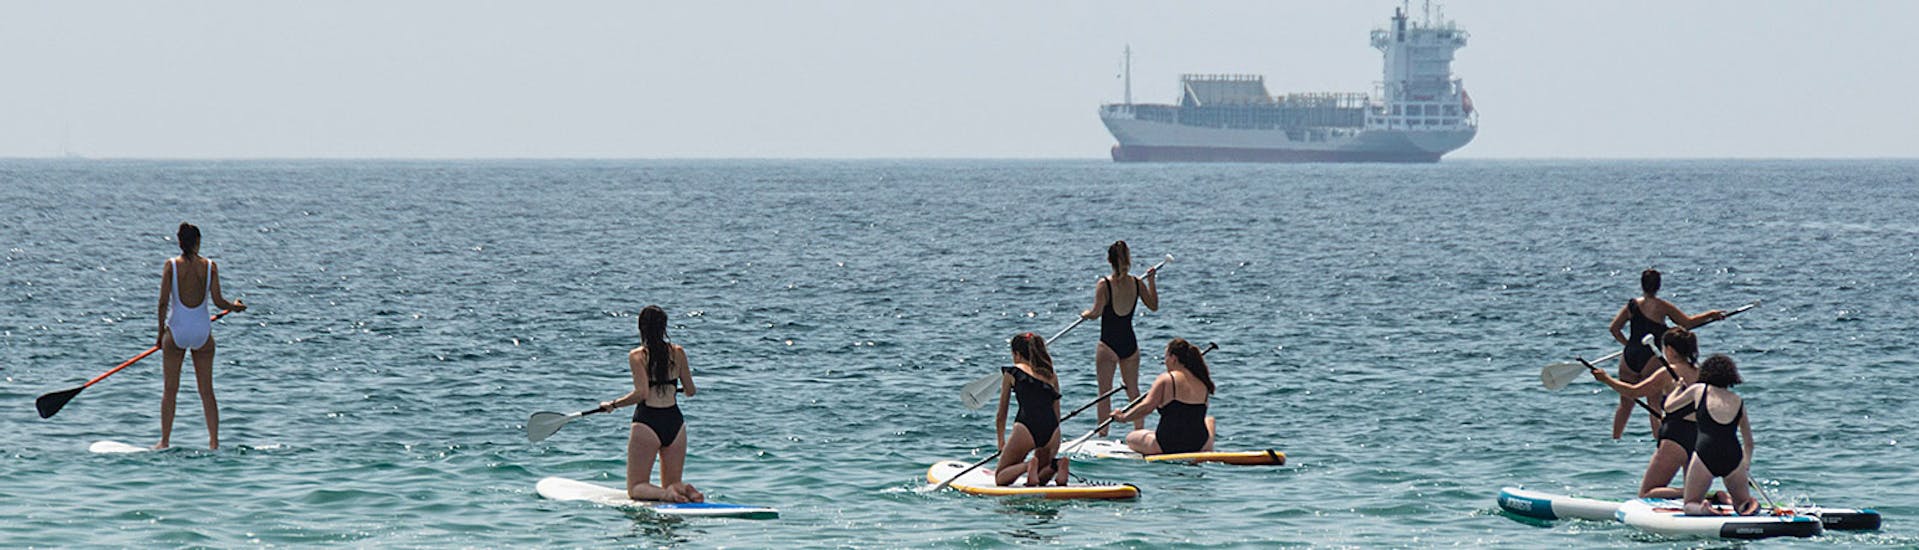 People practising SUP Lessons on Malagueta Beach for Beginners with Malagawake.